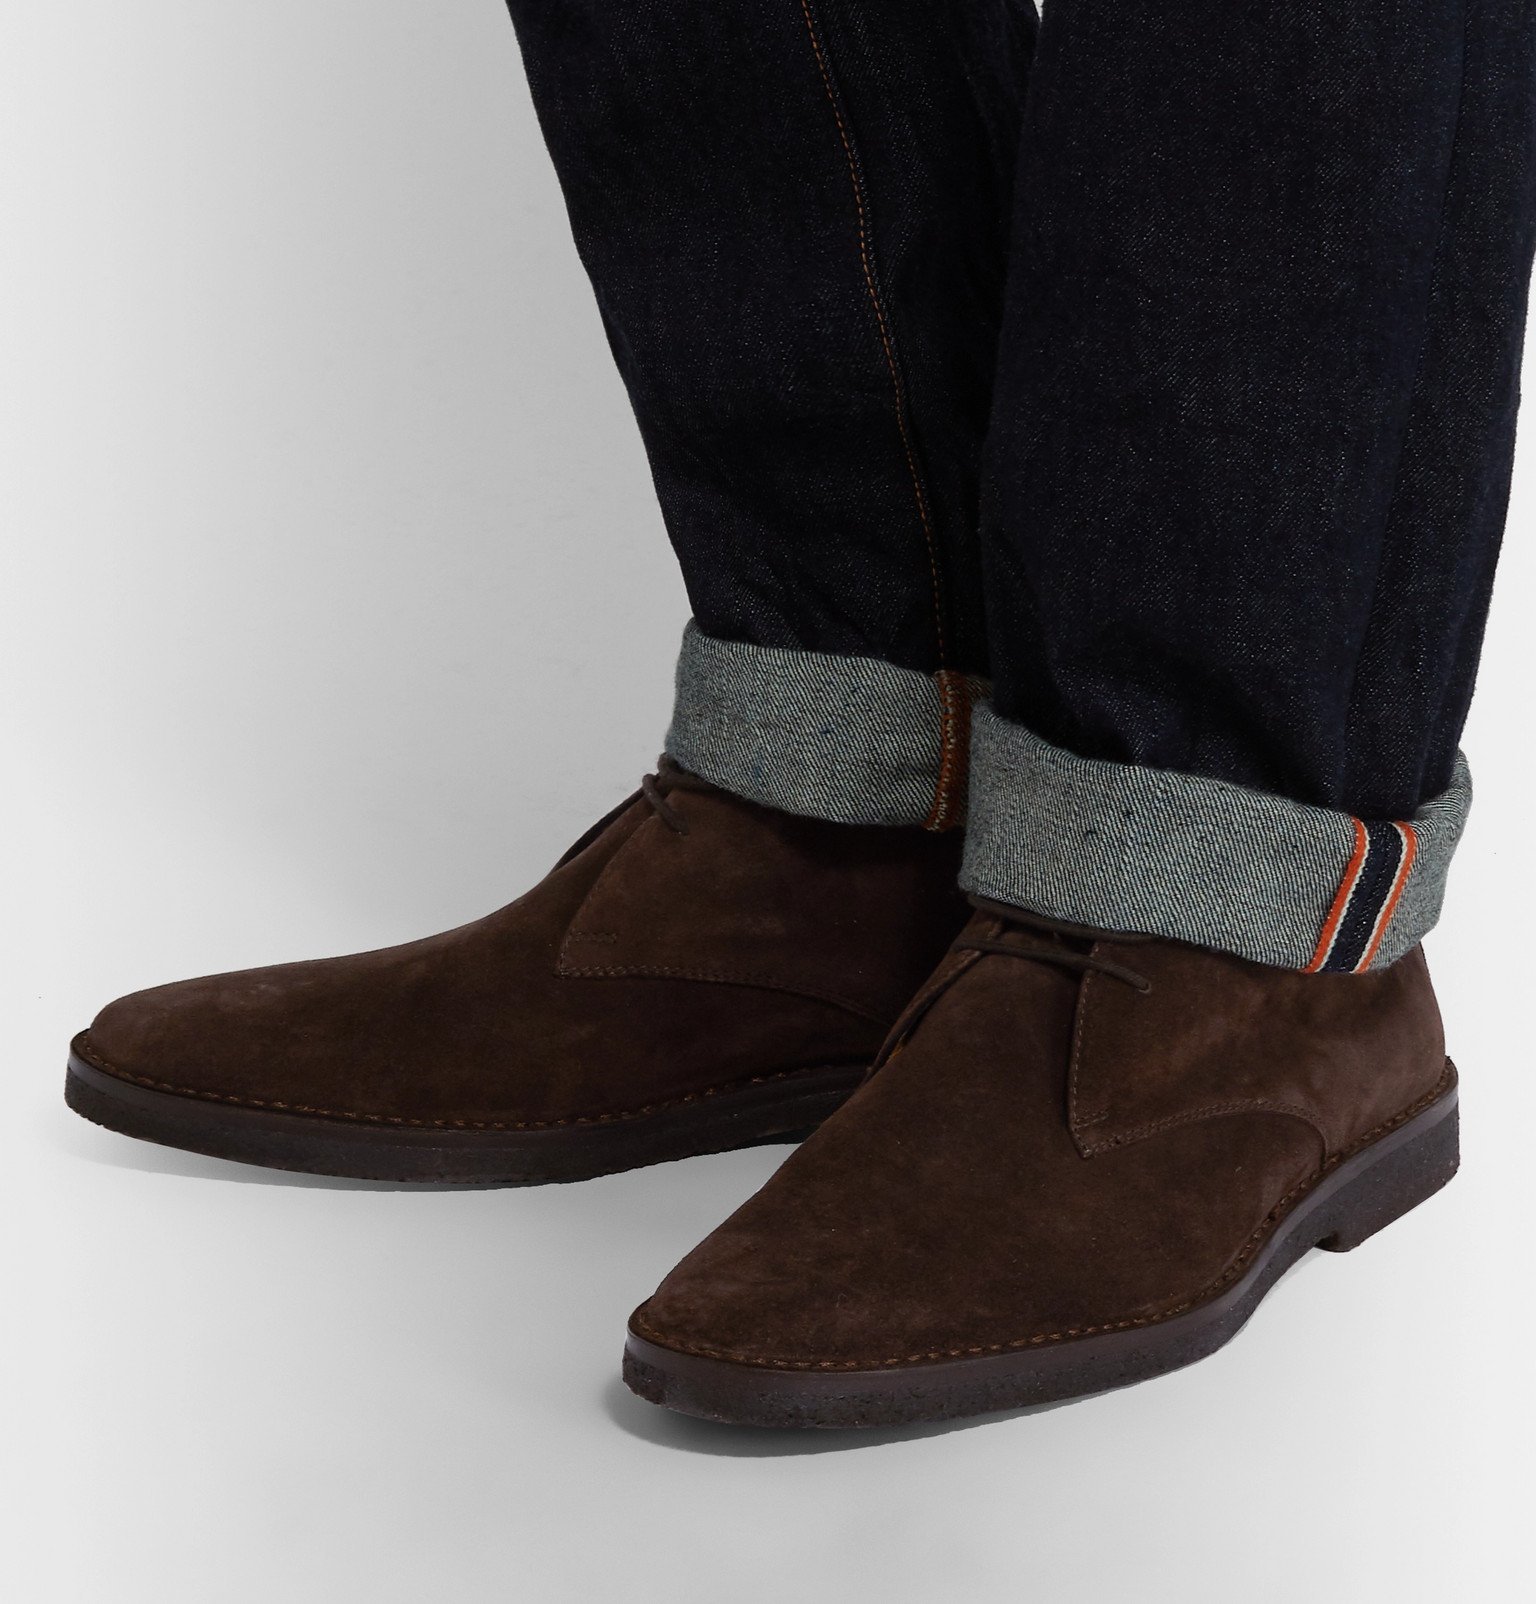 Connolly - Suede Desert Boots - Brown Connolly